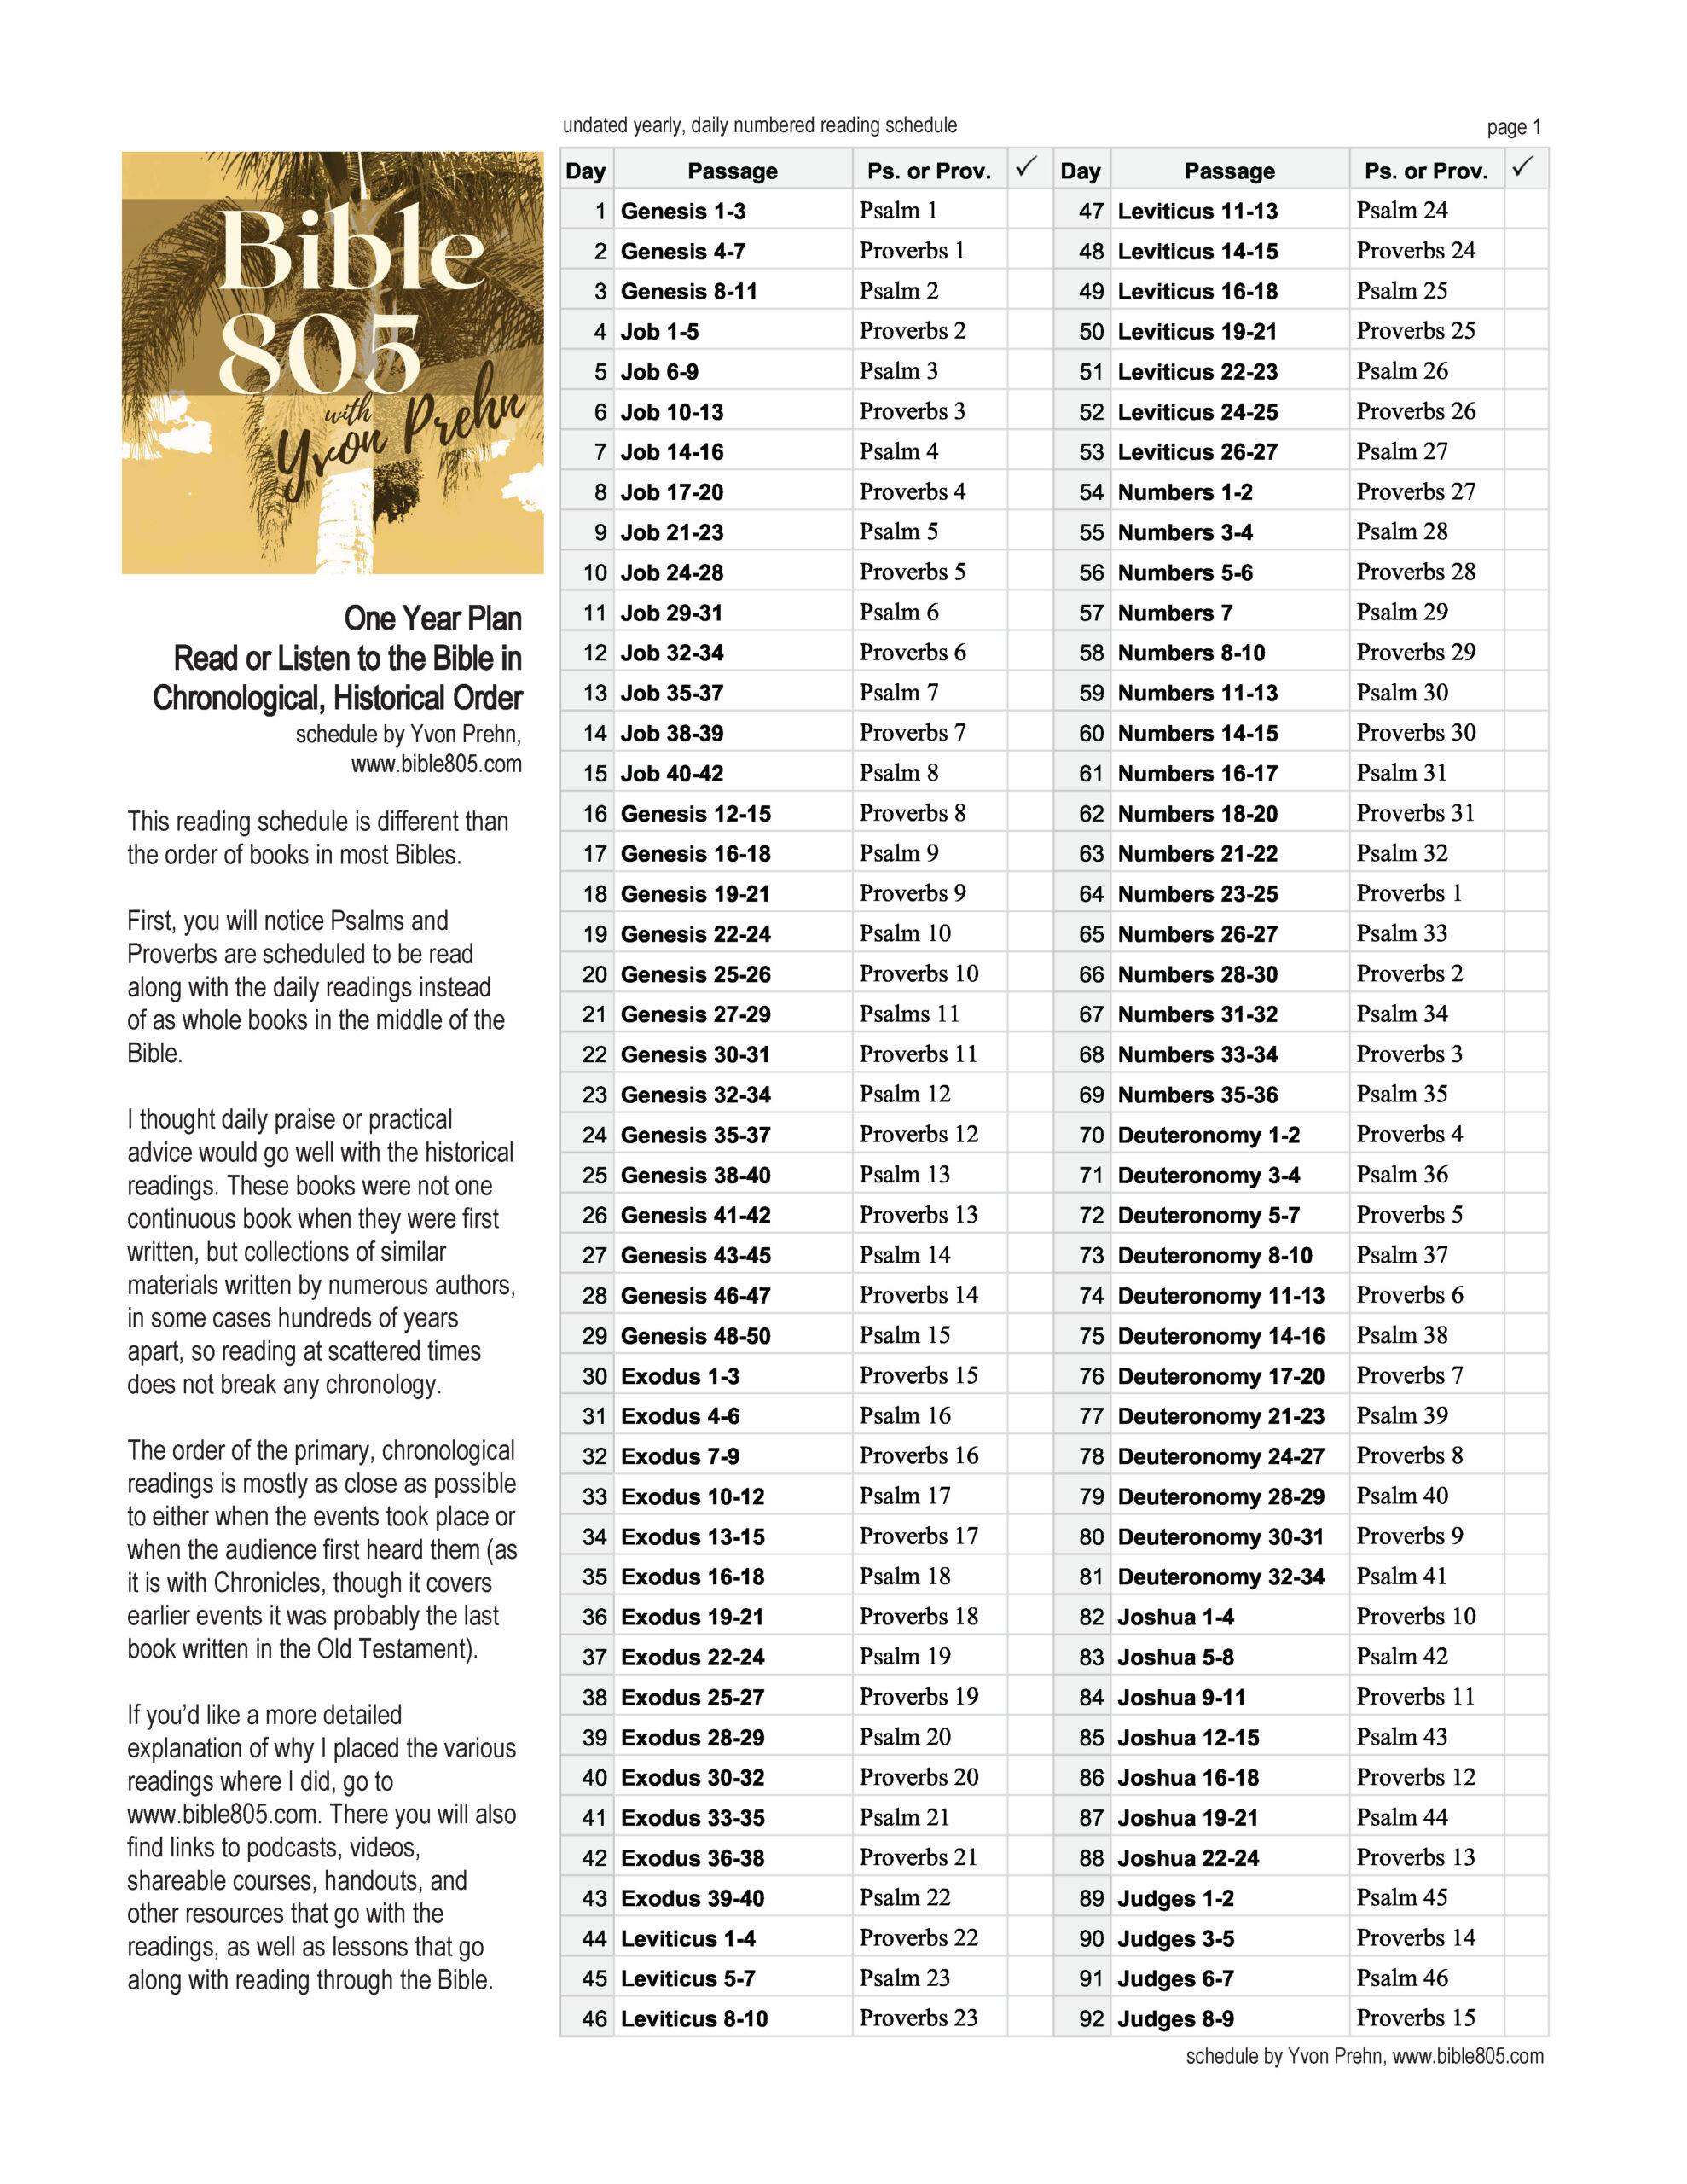 Schedule for Reading Through The Bible in Chronological Order, download